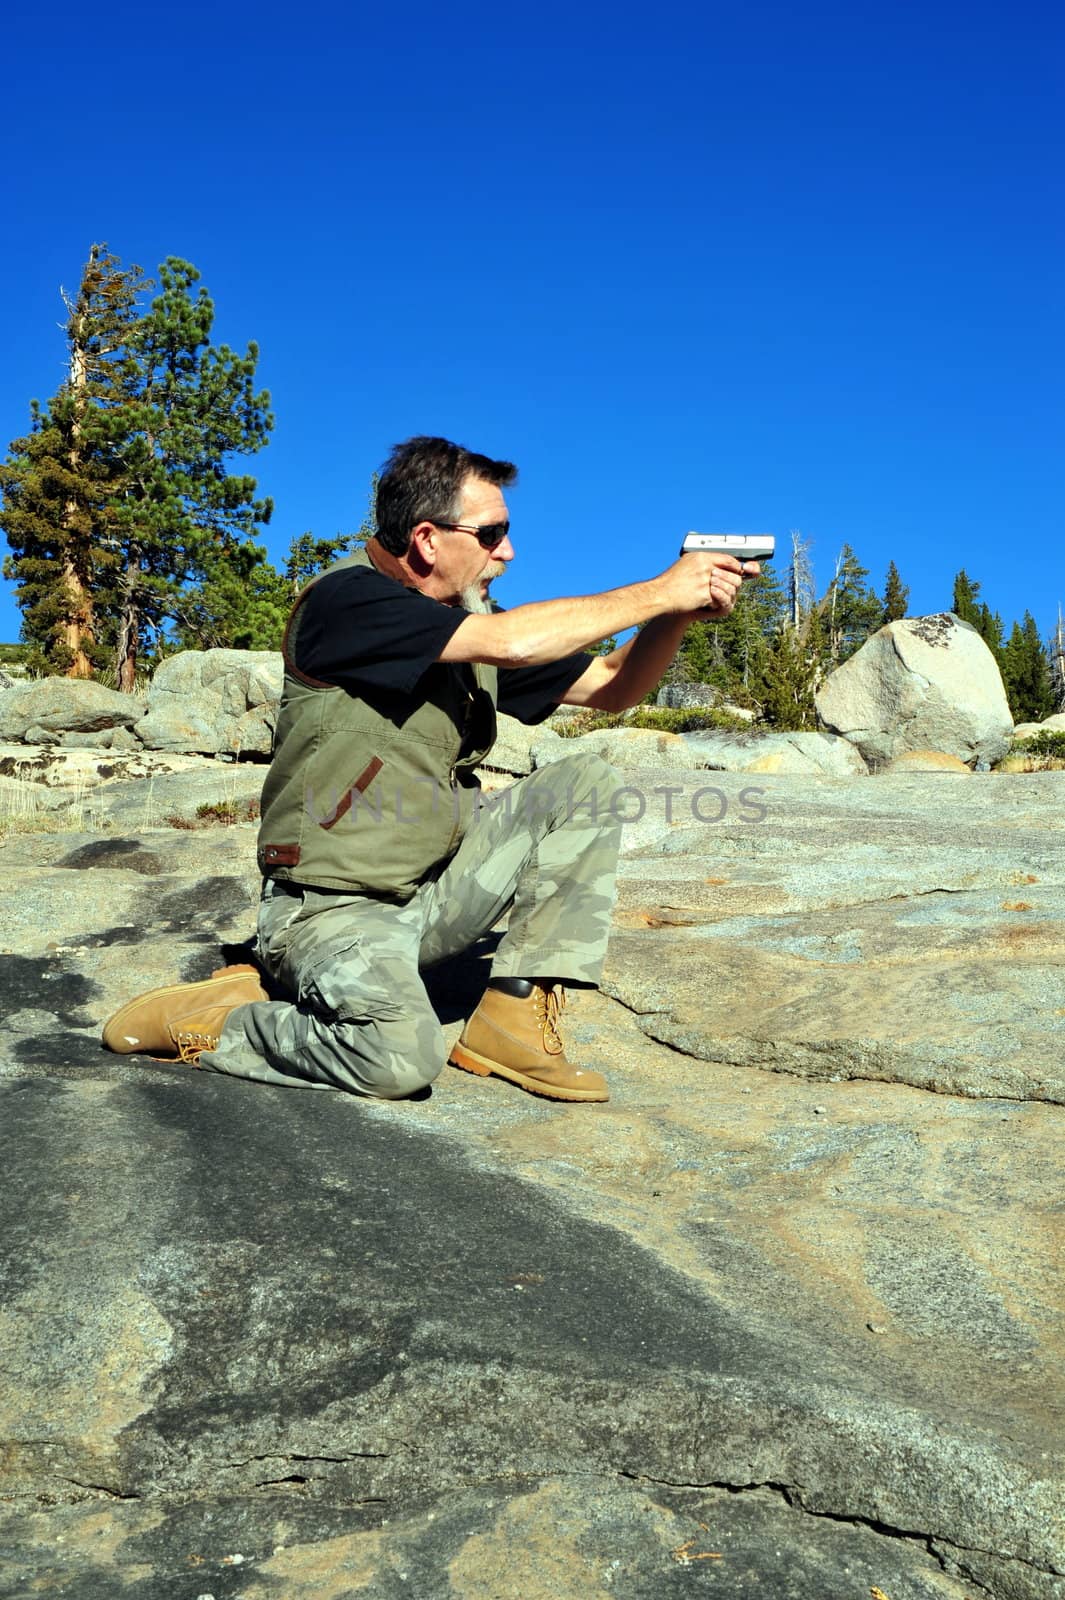 Man target shooting in a kneeling position with a semi automatic pistol